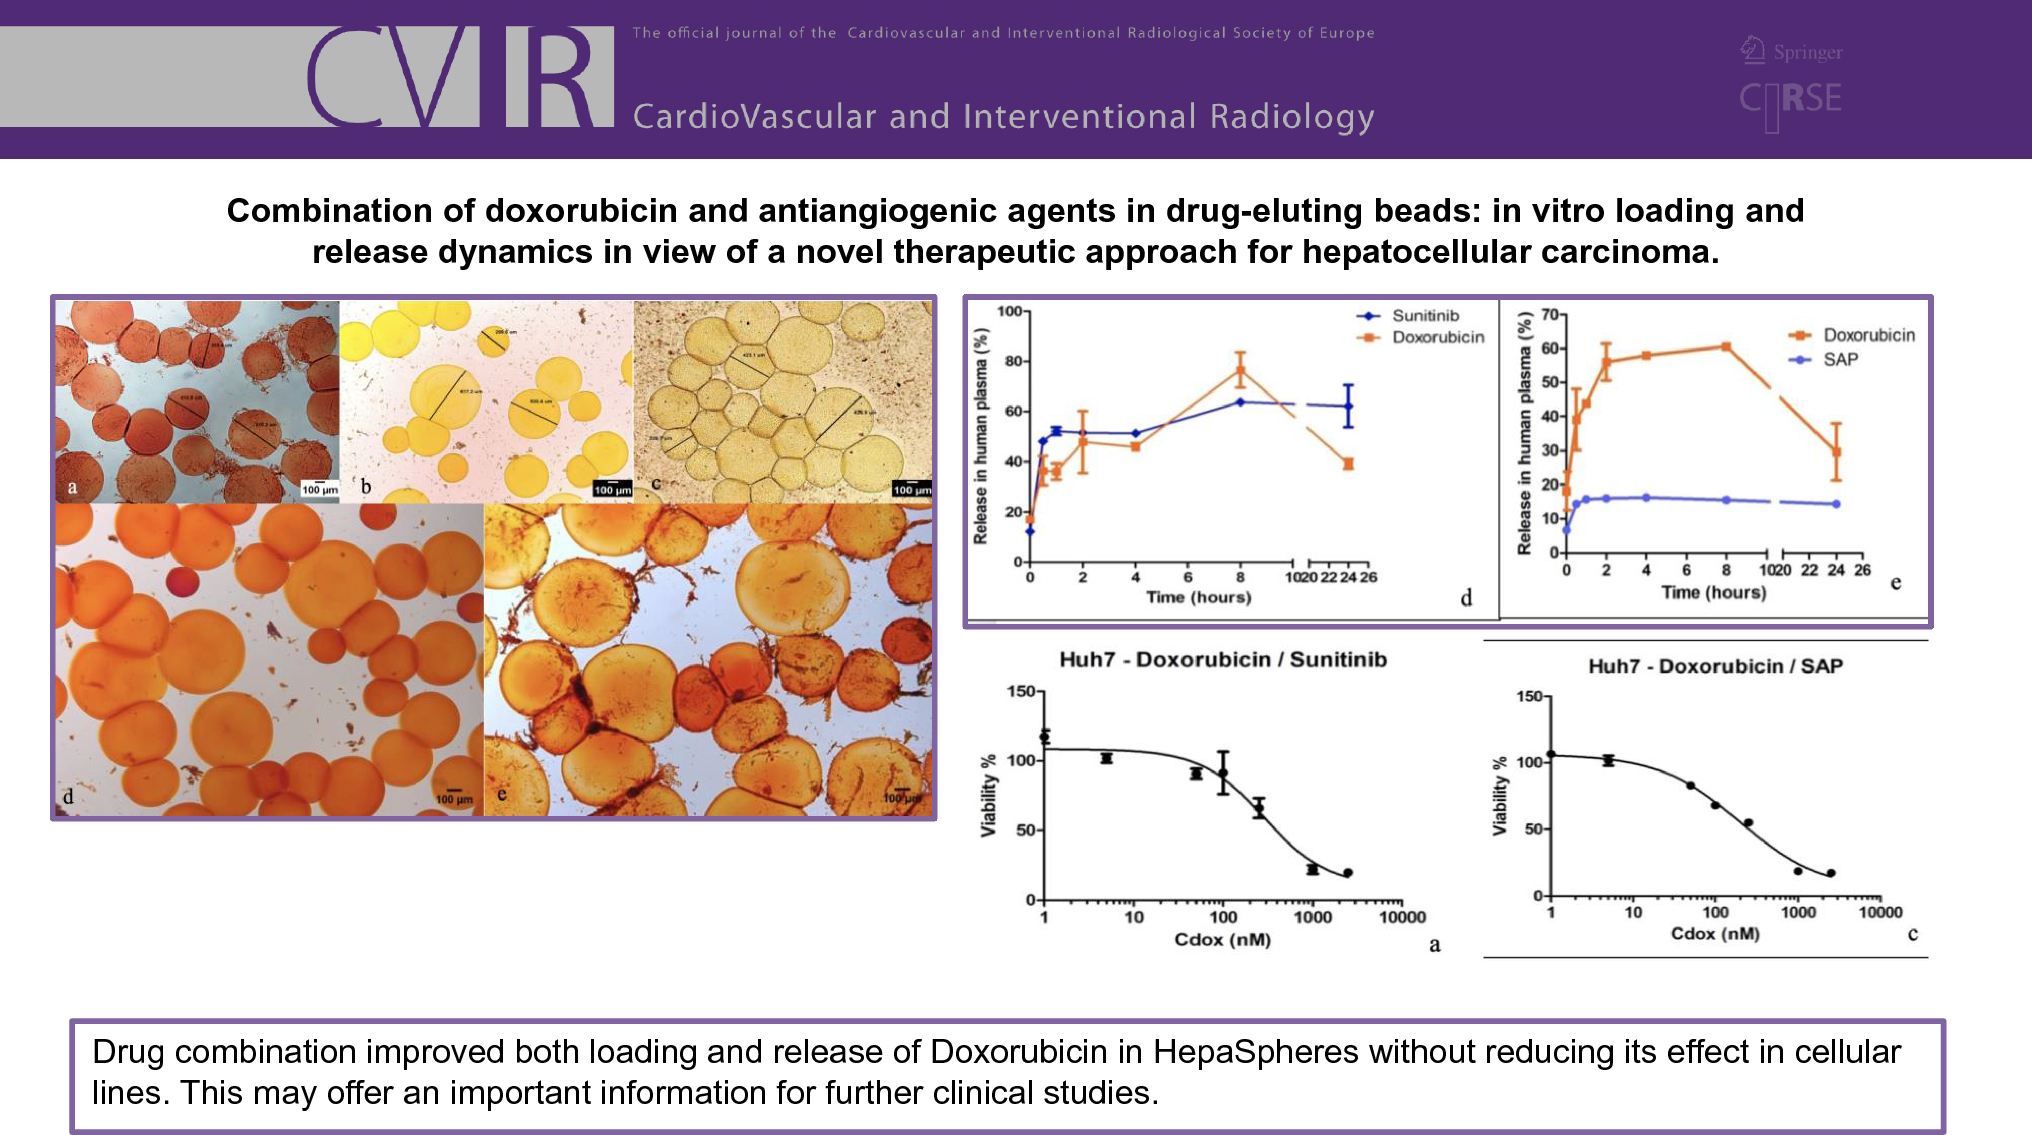 Combination of Doxorubicin and Antiangiogenic Agents in Drug-Eluting Beads: In Vitro Loading and Release Dynamics in View of a Novel Therapeutic Approach for Hepatocellular Carcinoma